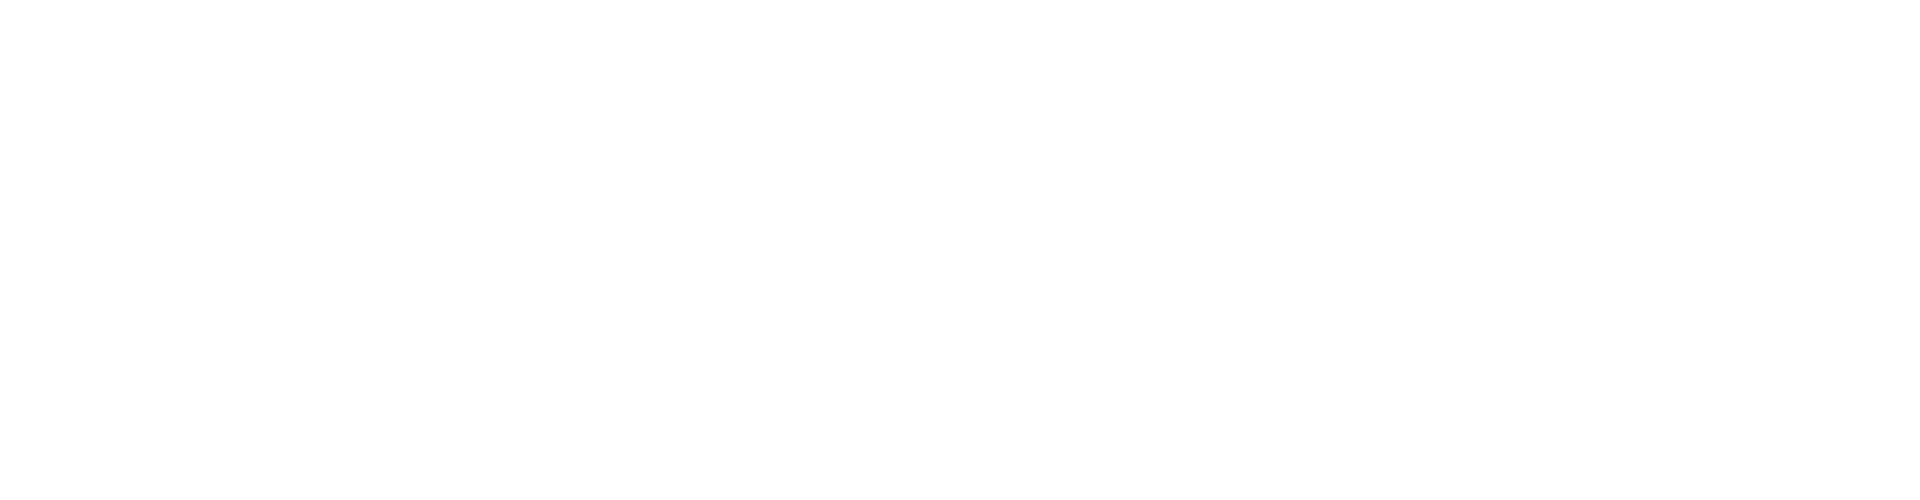 The Scuffed Series 14 - Shrinking & Growing